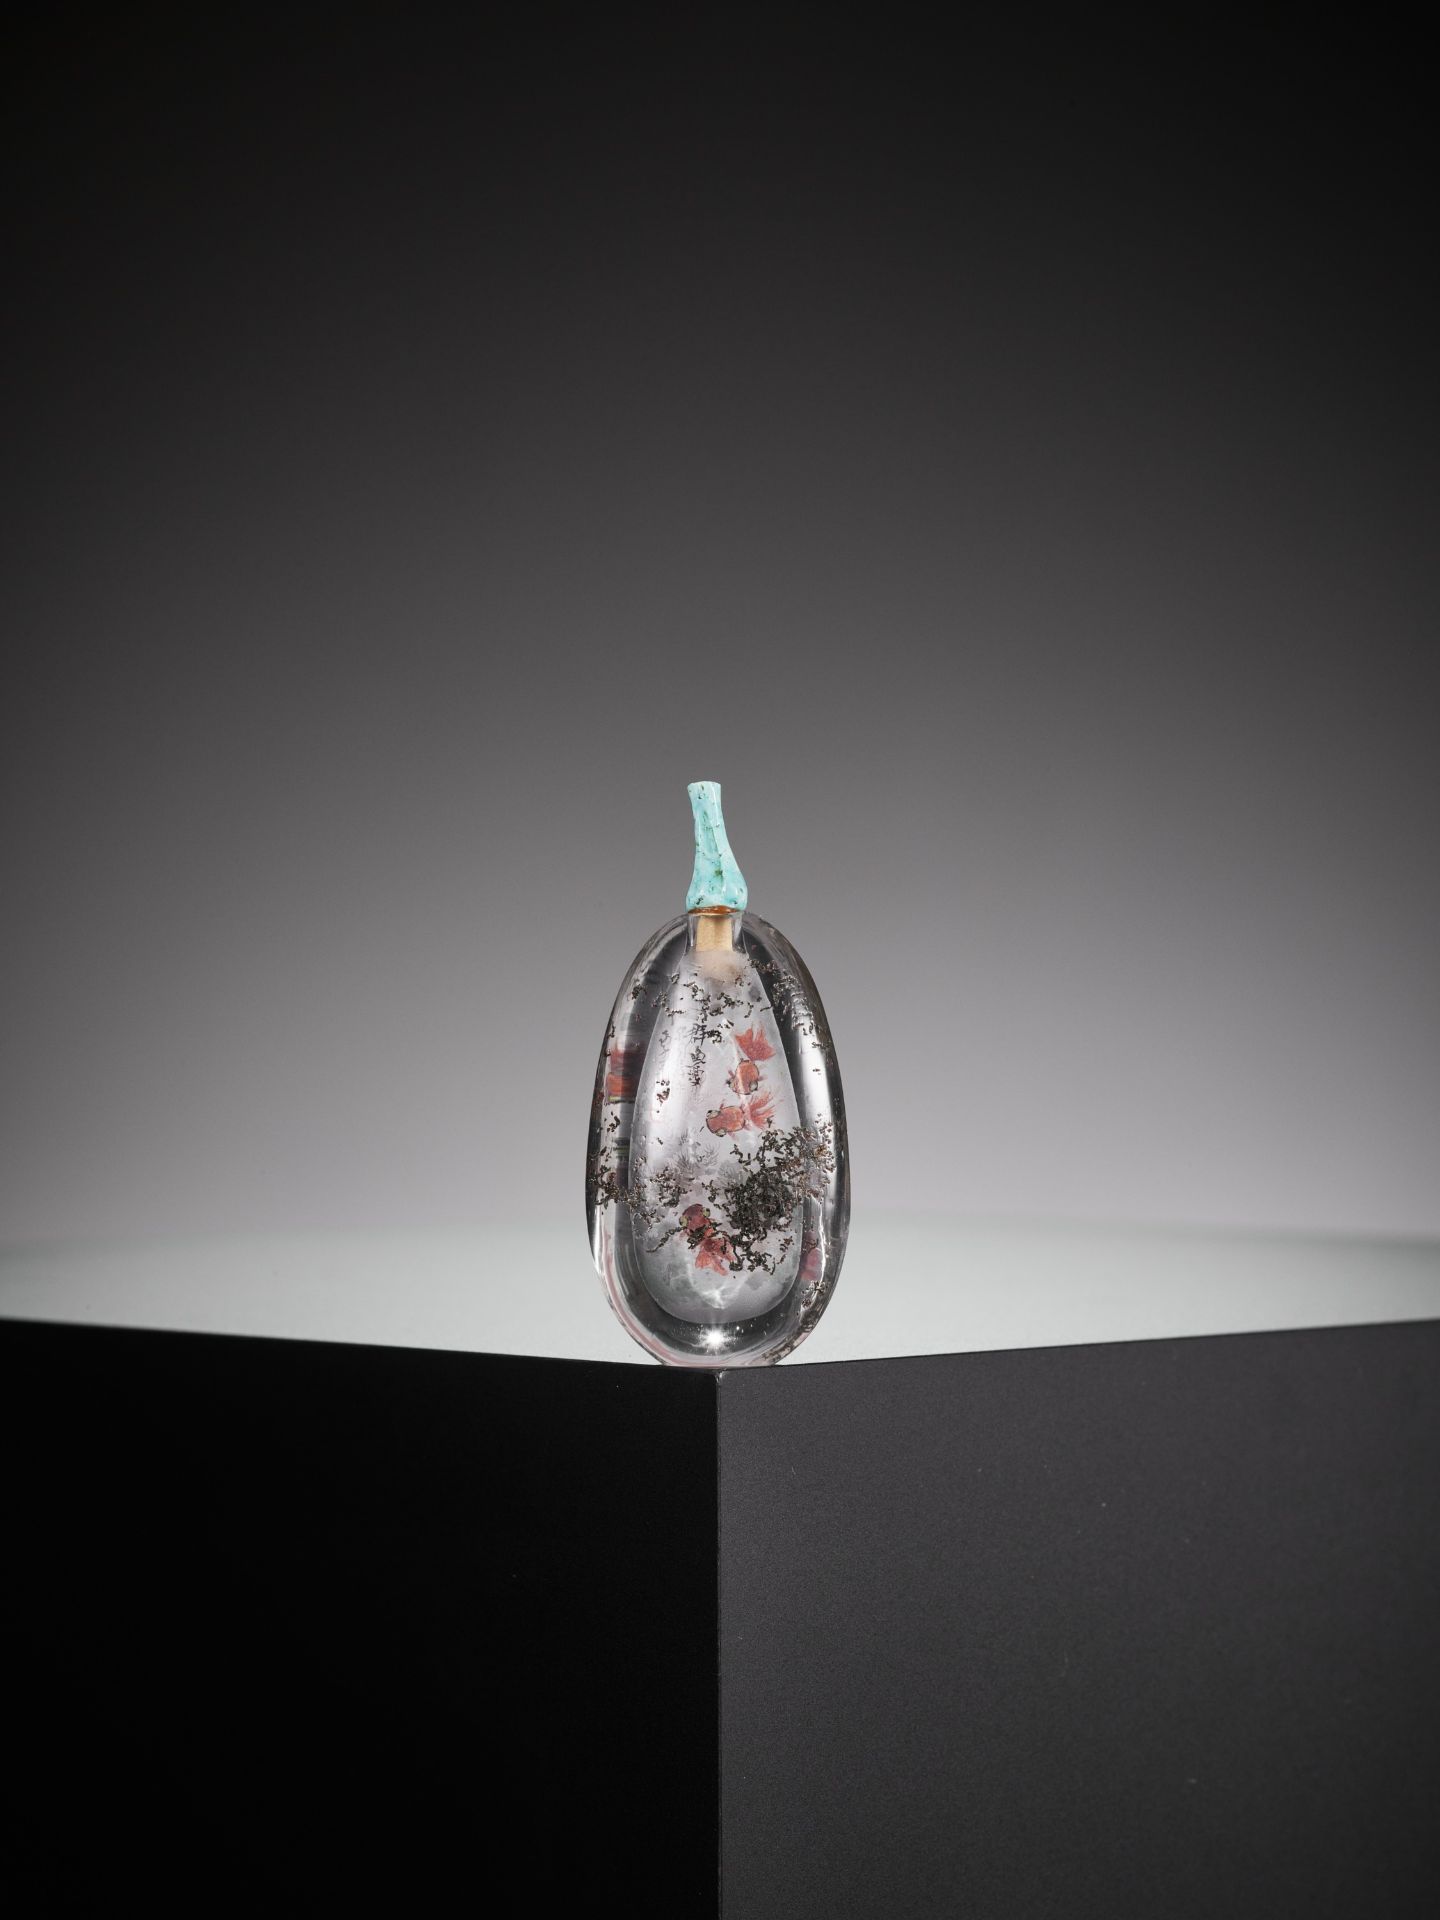 A MINIATURE INTERIOR-PAINTED ROCK CRYSTAL SNUFF BOTTLE, BY TIAN CHENG - Image 8 of 10